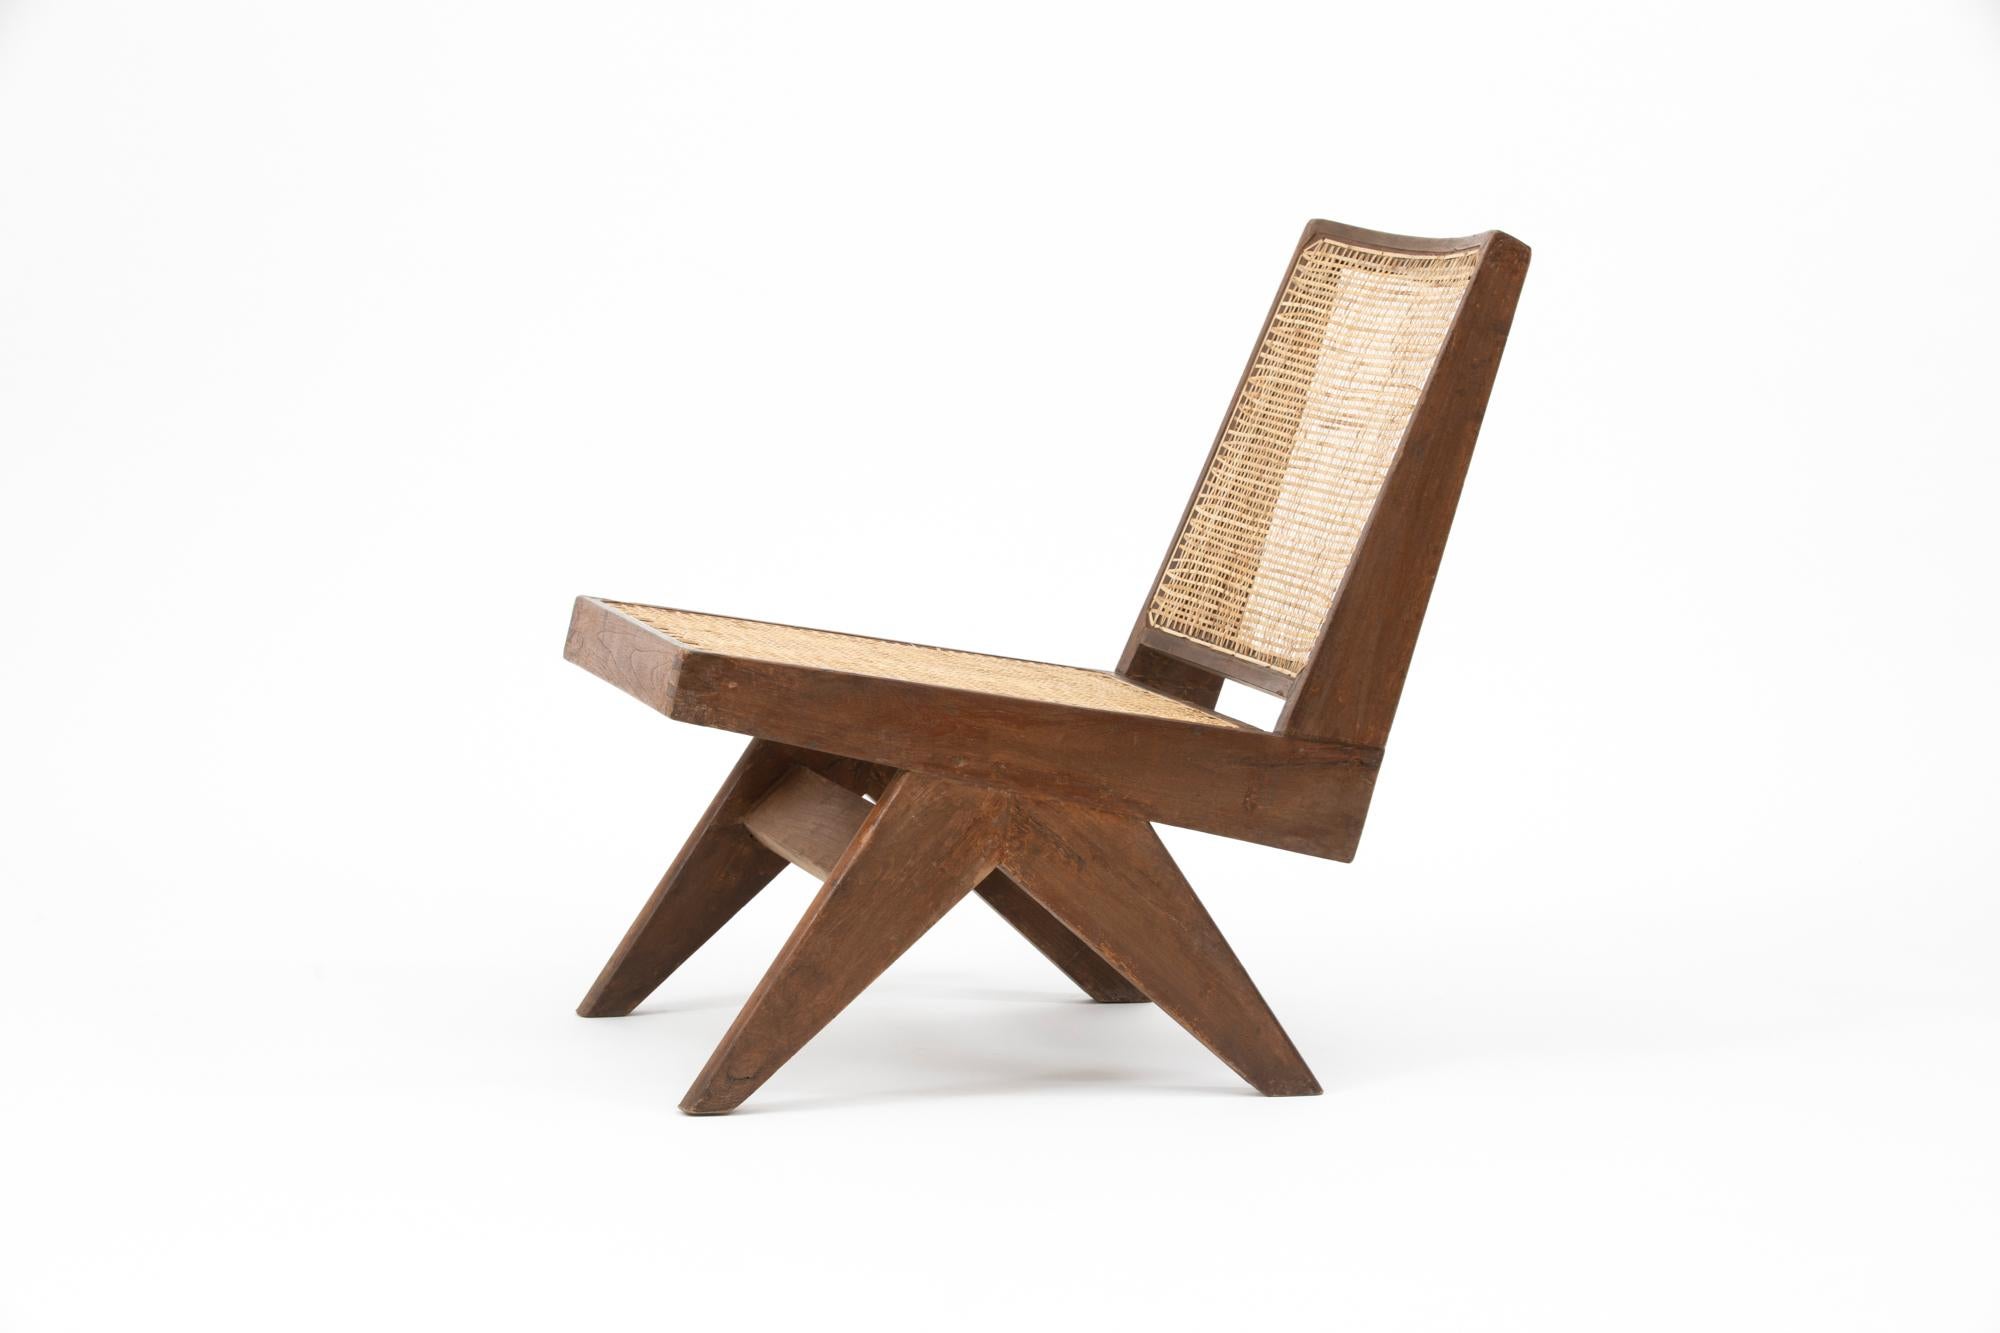 Low lounge chairs, designed by Pierre Jeanneret for the famous modernist capital city of Chandigarh, India that was designed by Le Corbusier, Jeanneret and their team. Model number is PJ-SI-35-A.